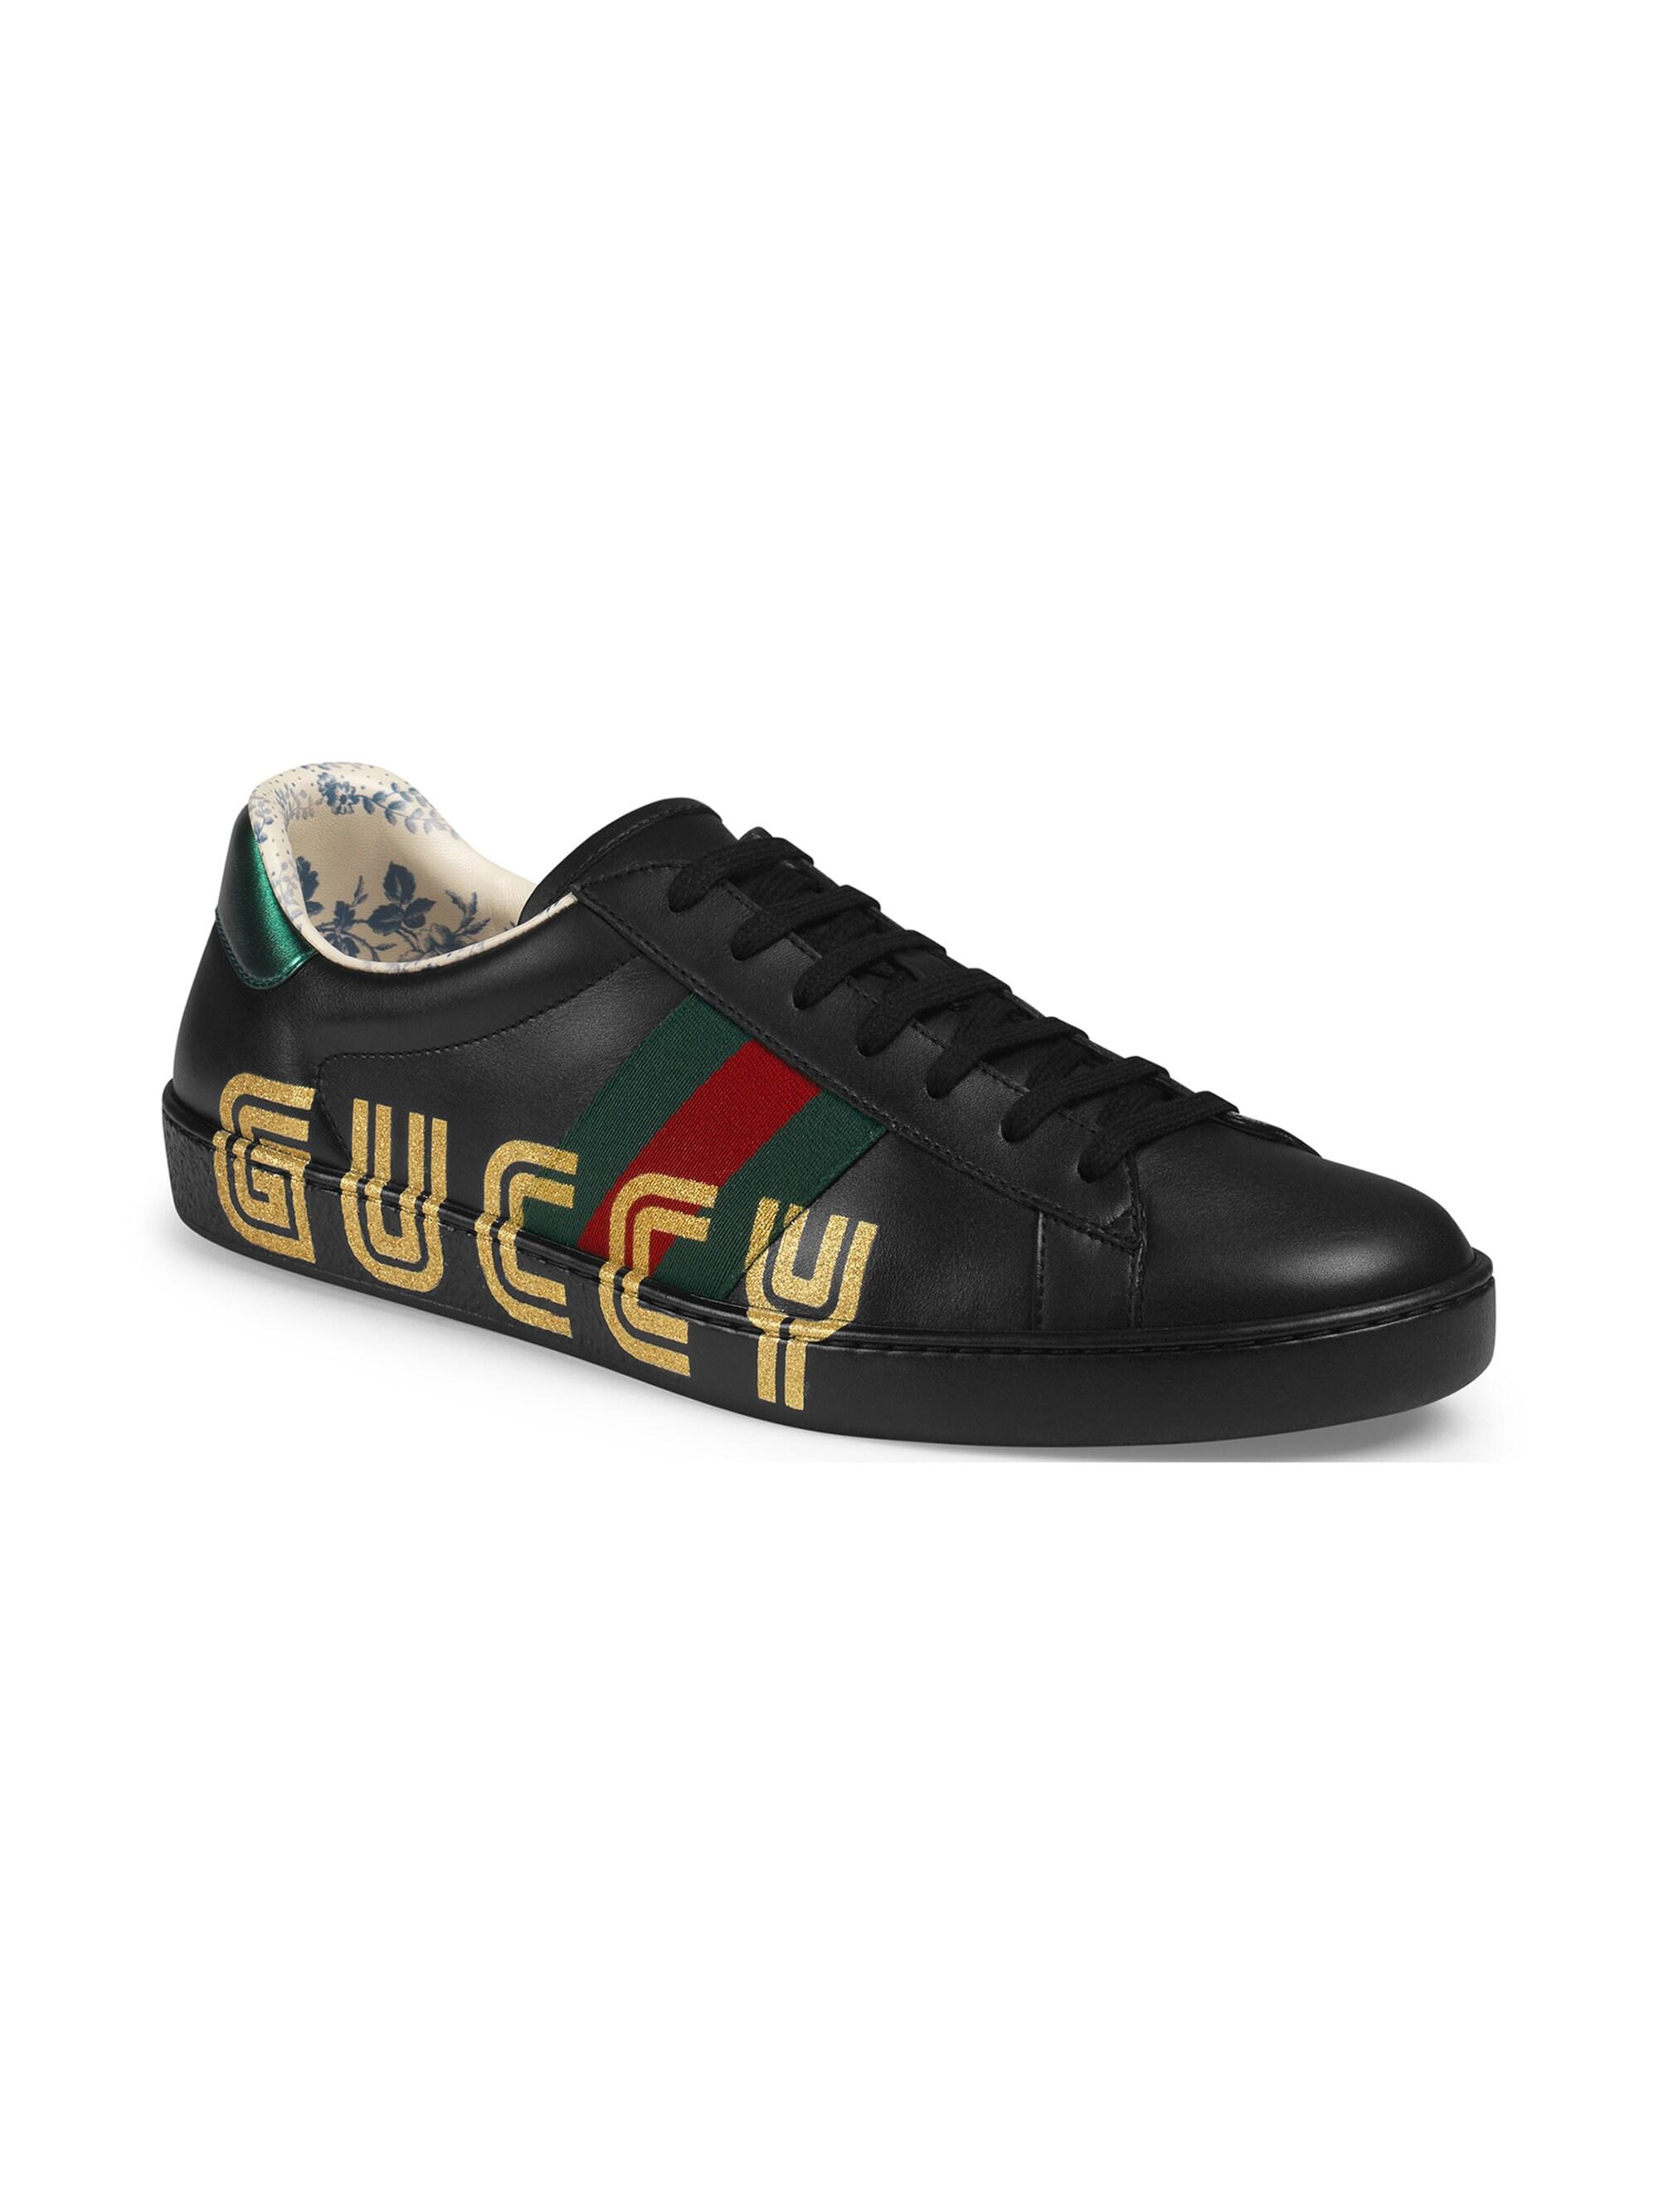 Gucci Leather Men's New Ace Sneaker With Guccy Print - Multi White in Black  Green (Black) for Men - Lyst